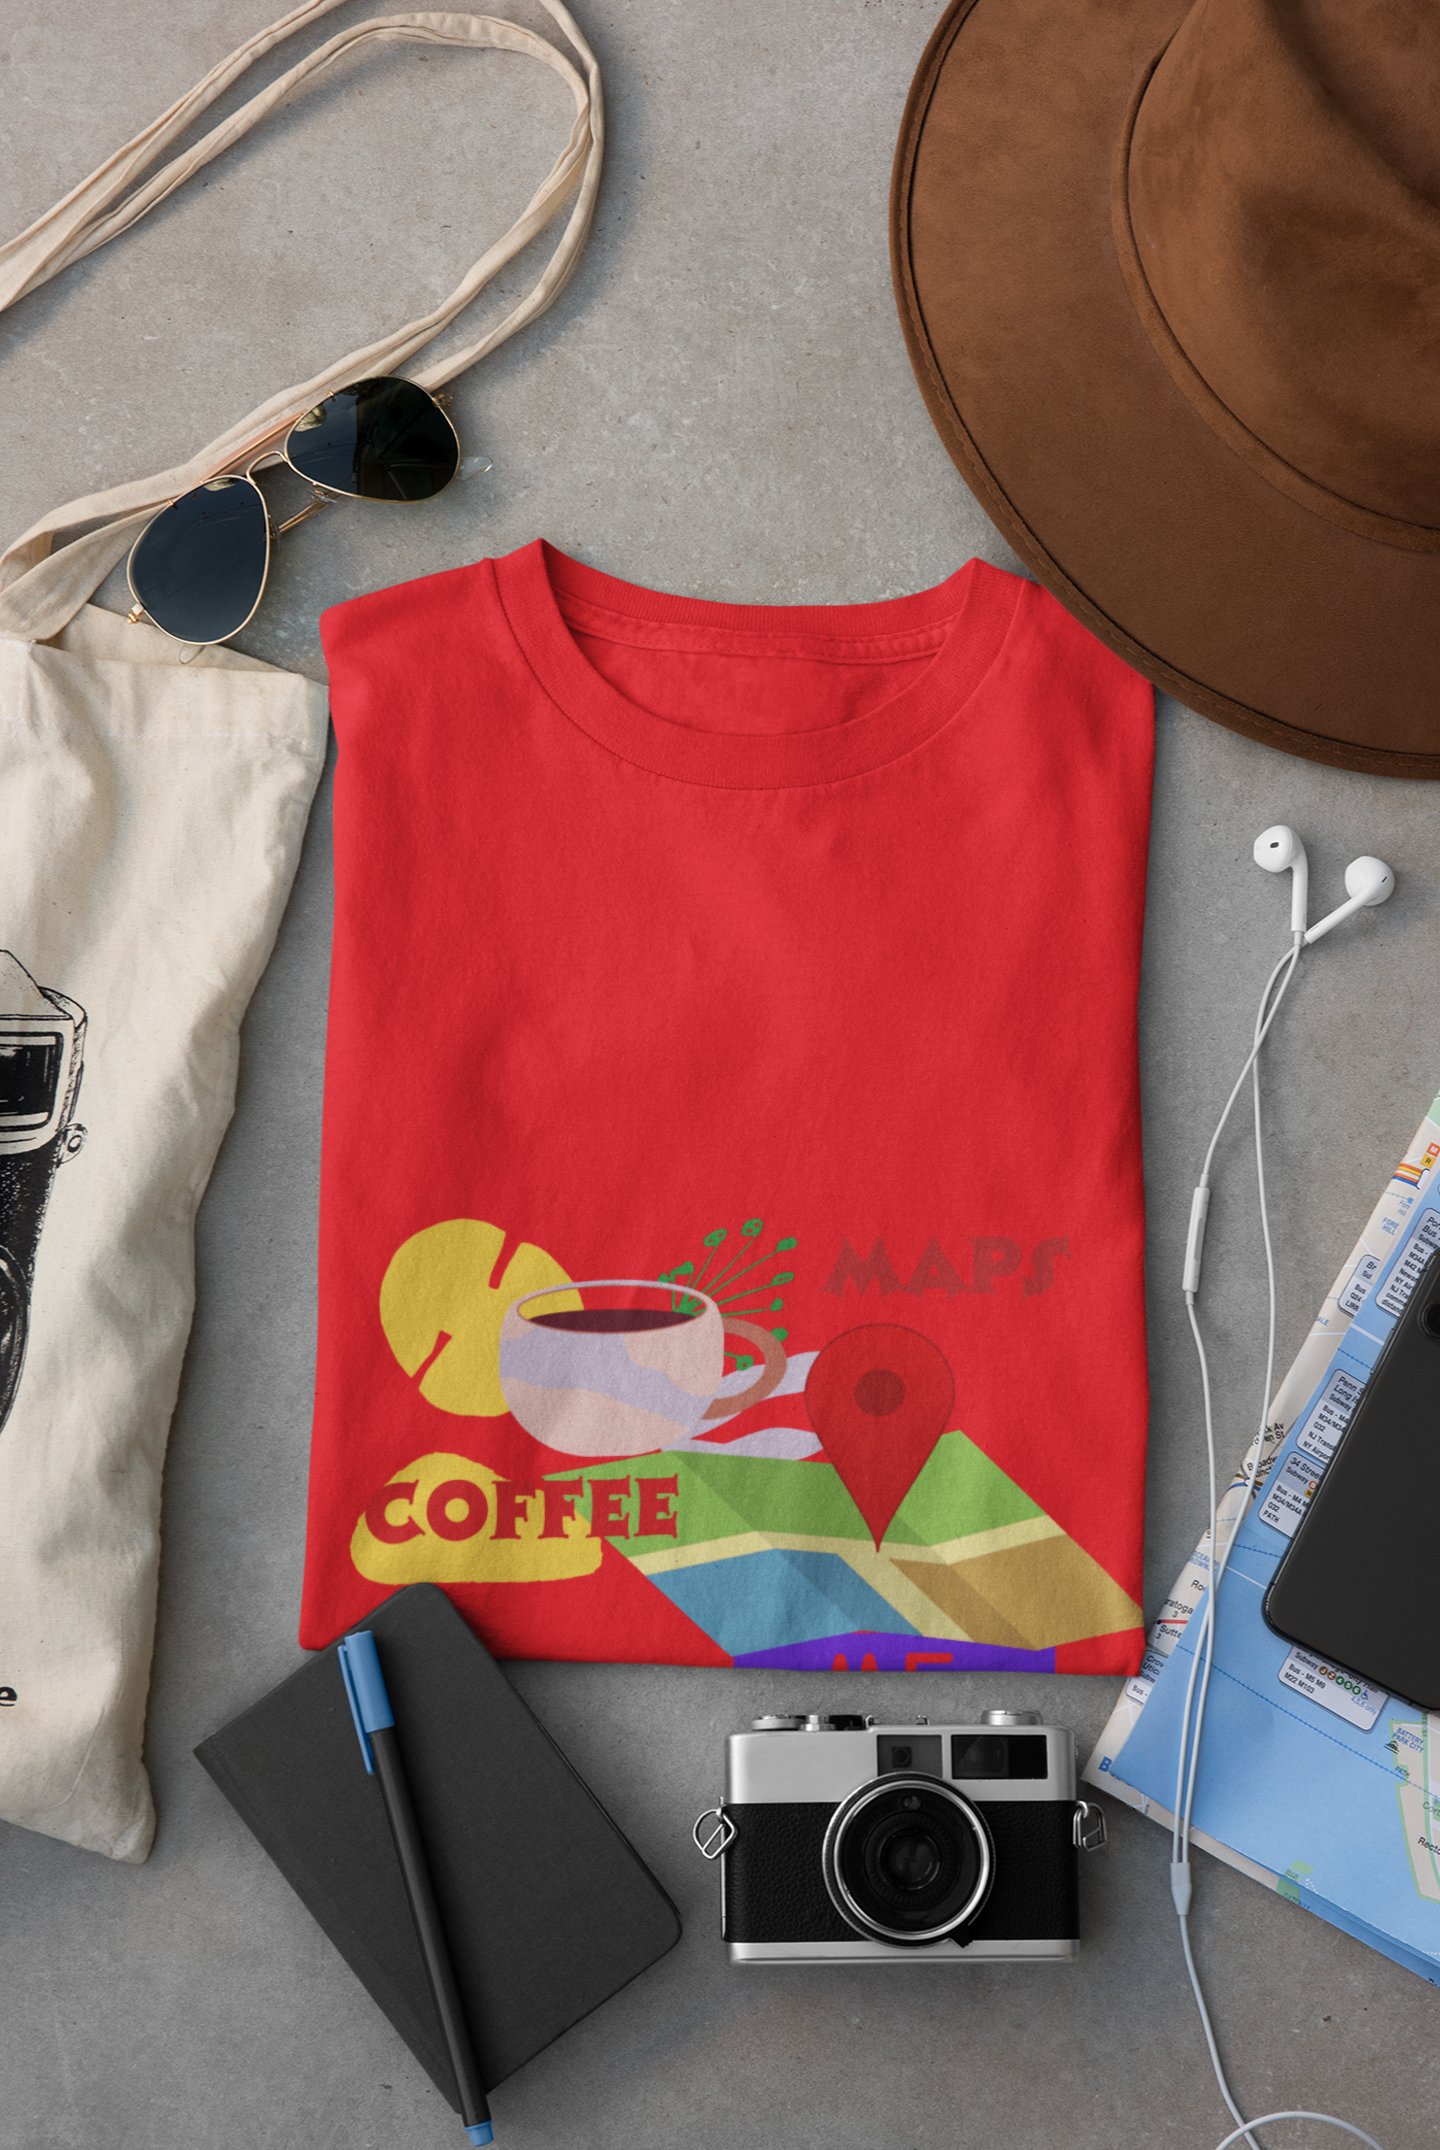 COFFEE WITH MAP T SHIRT